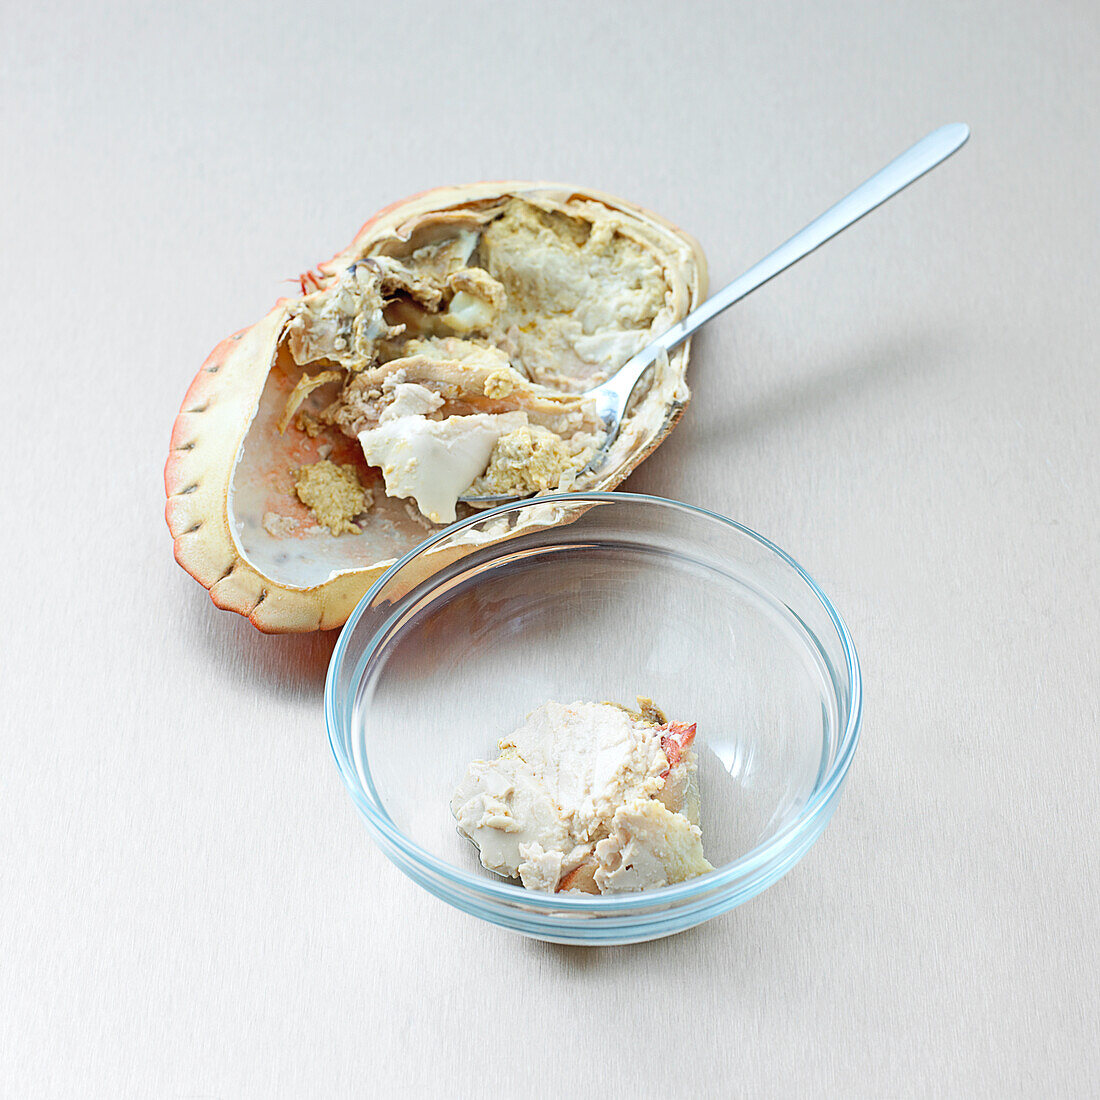 Scooping crab meat from shell